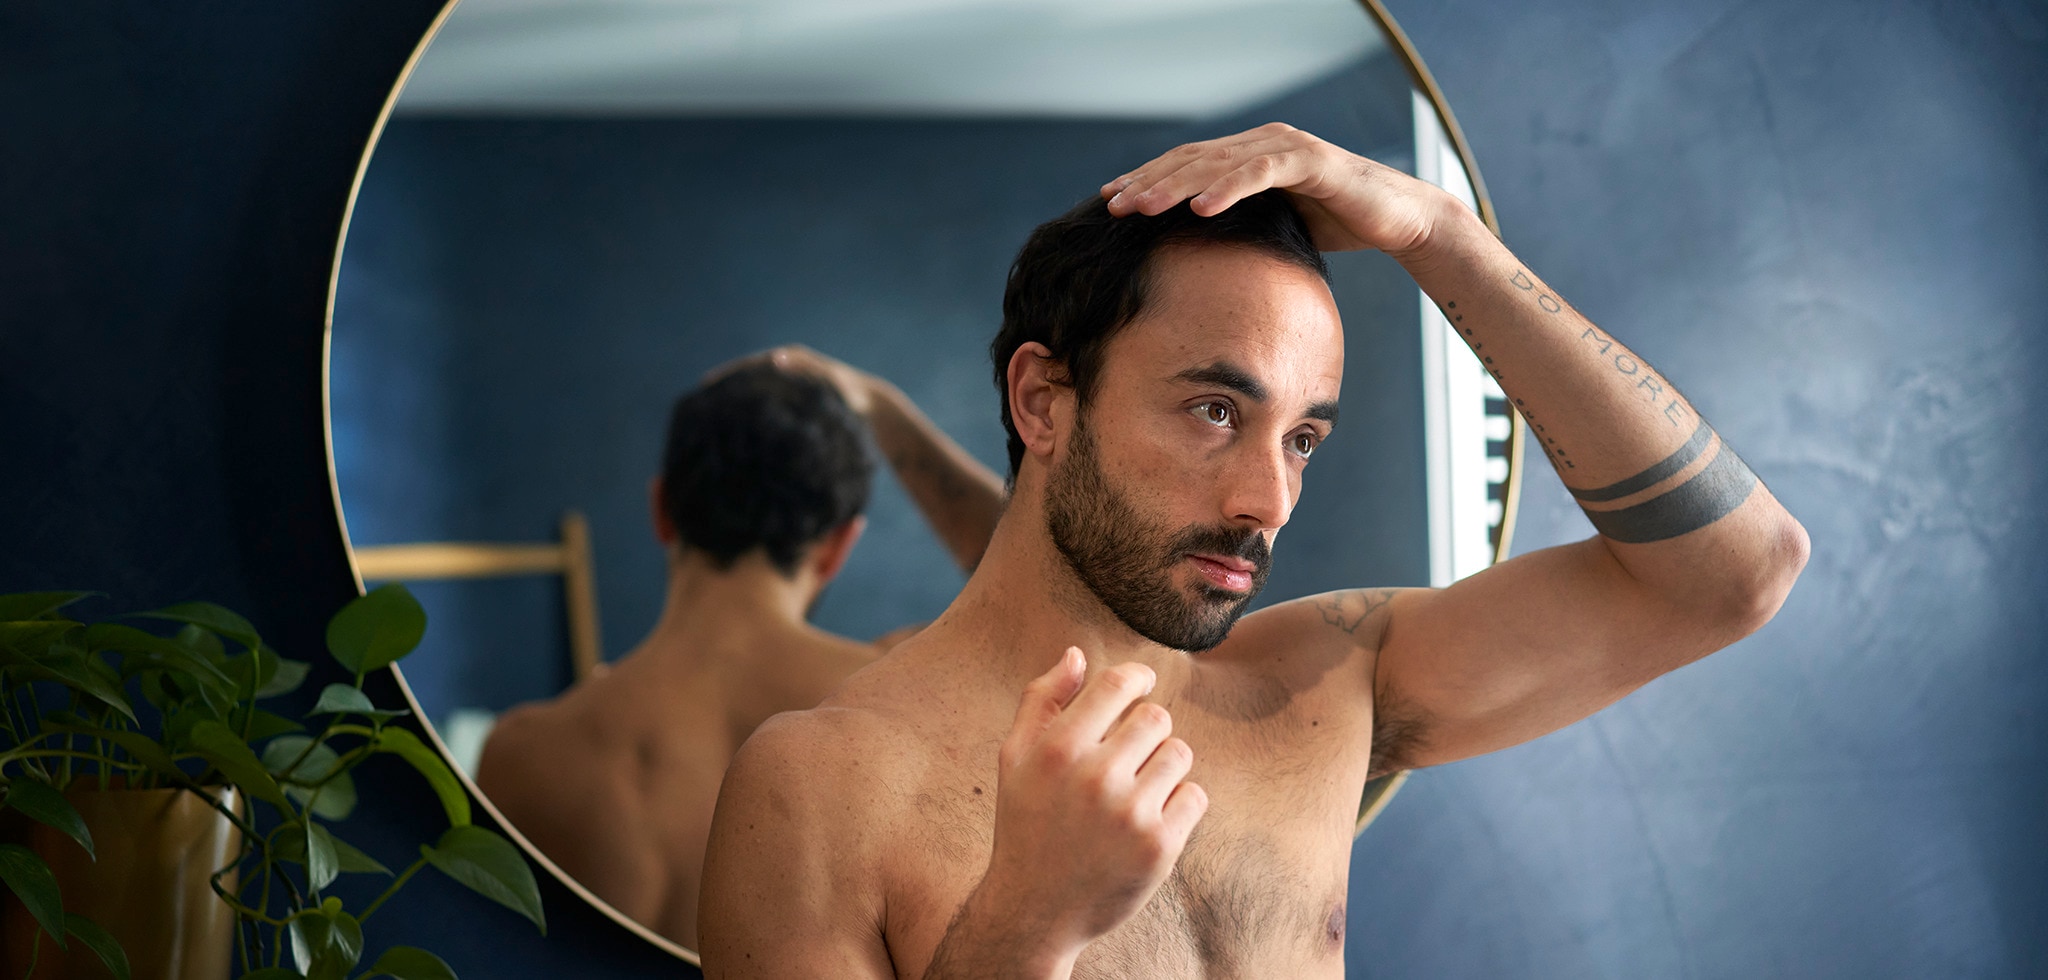 Dove Men+Care: 5 tips to enhance your grooming routine